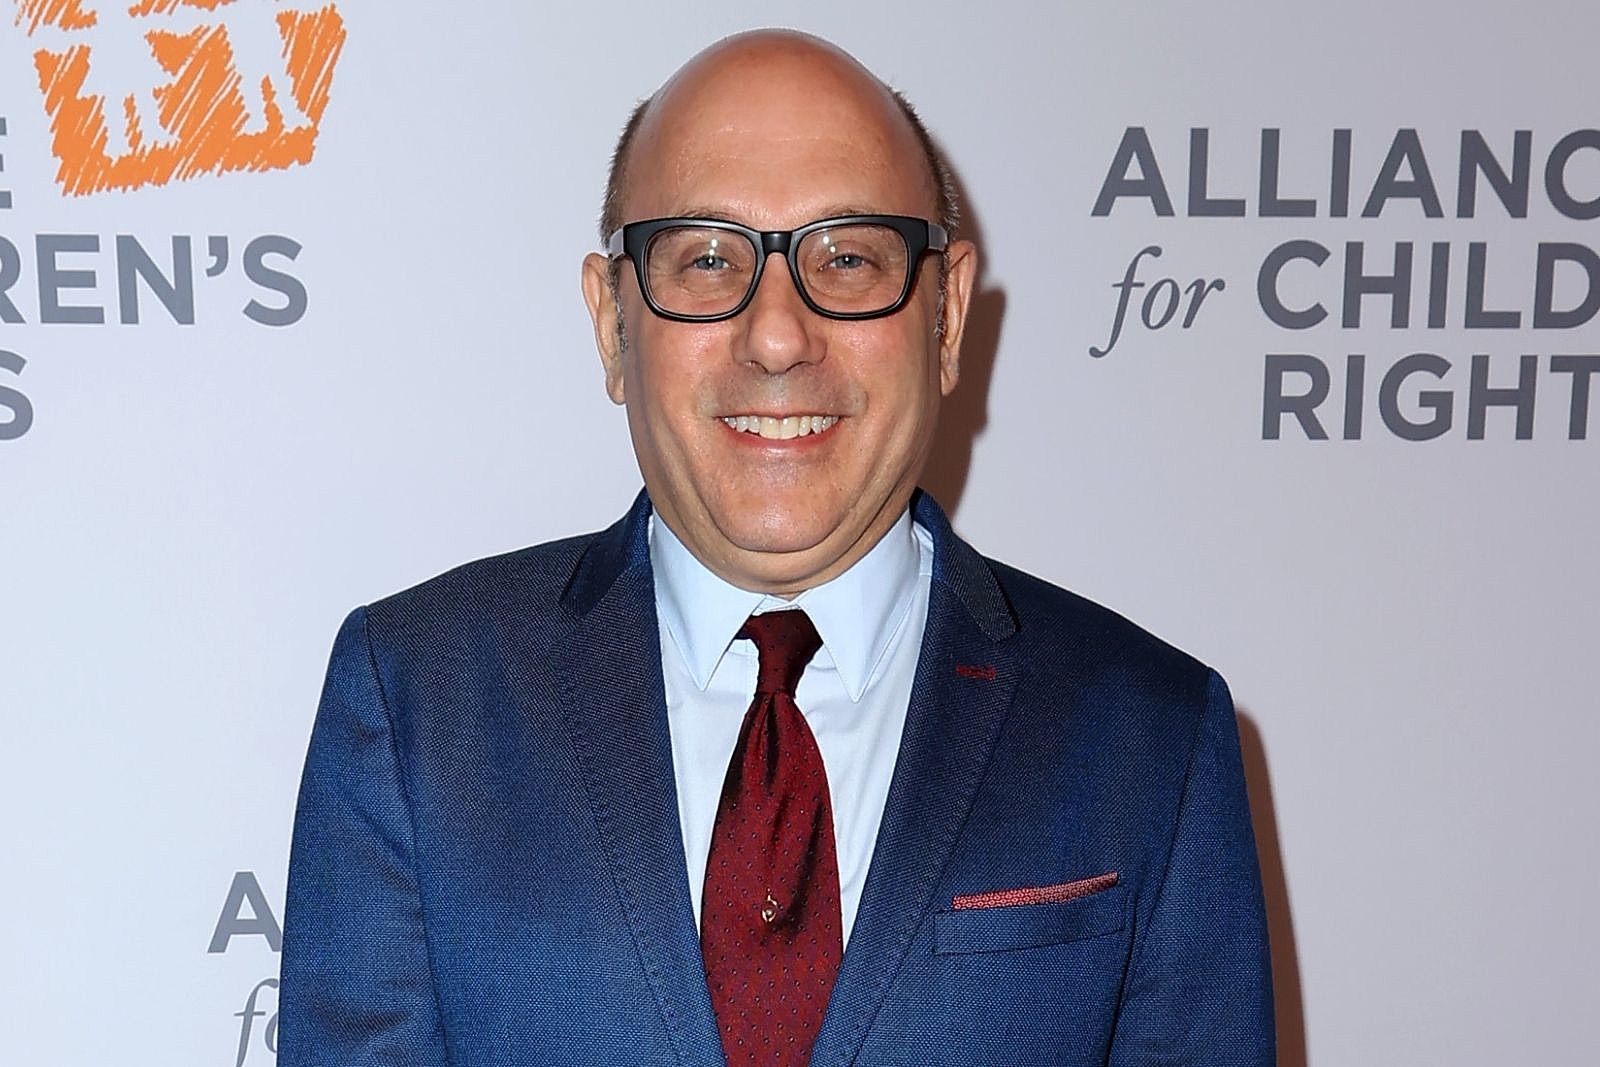 Sex and The City Actor Willie Garson (Stanford) Has Died at the Age of 57